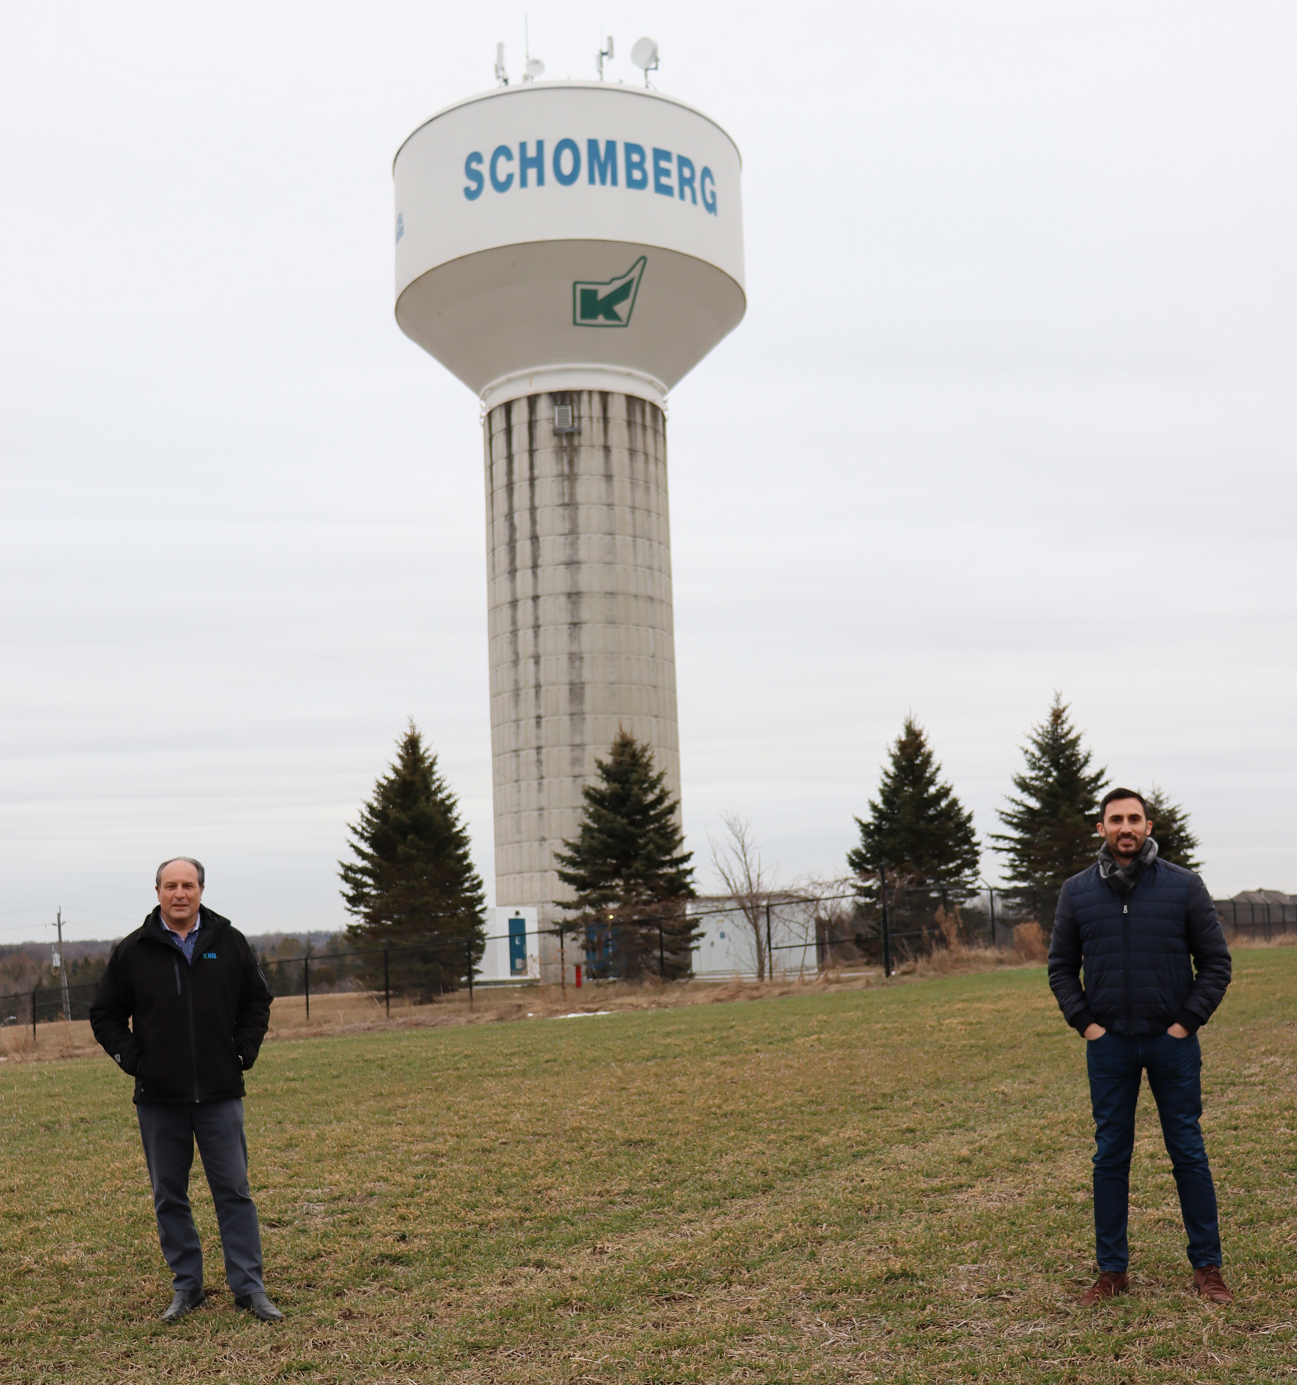 King Township Mayor Steve Pellegrini (left) and Stephen Lecce, MPP (King-Vaughan) and Minister of Education, stand in front of the Schomberg water tower. King recently received Ontario Community Infrastructure Funds to make repairs and upgrades to the municipal water system in Schomberg. 